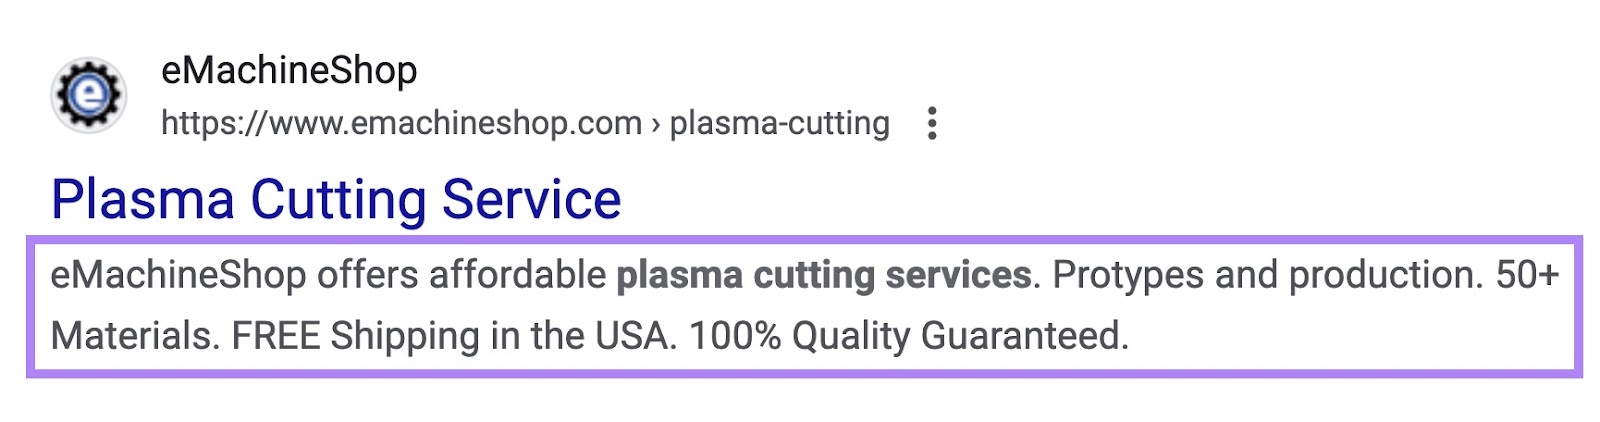 SERP listing of custom parts manufacturer eMachineShop with the keywords and enticing details in the meta description highlighted.